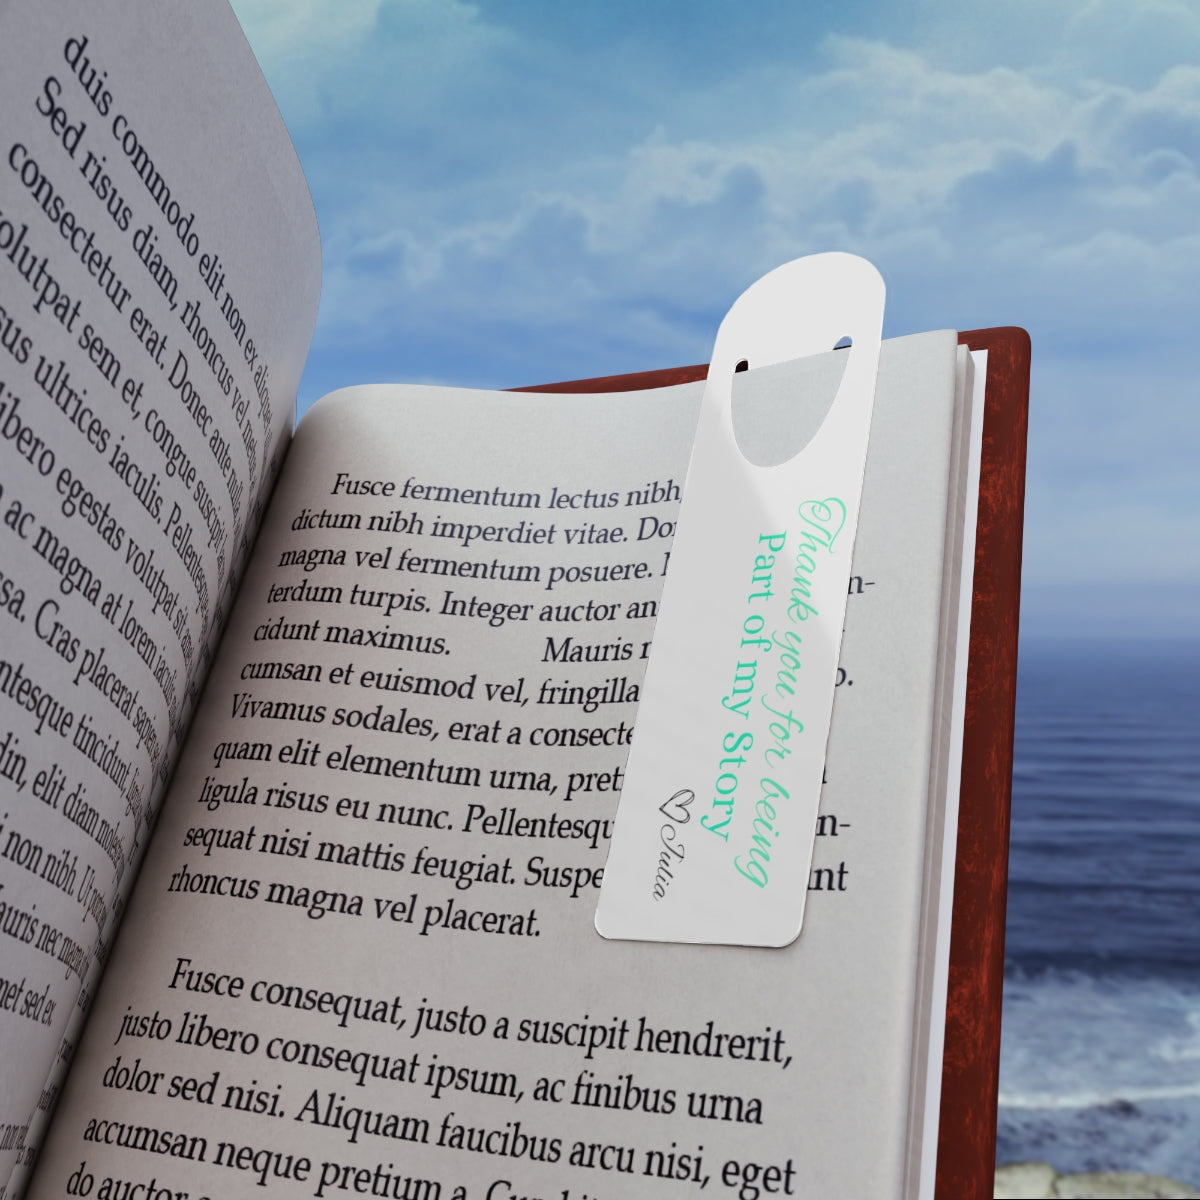 Get trendy with Teacher / Paraprofessional  Appreciation Bookmark -  available at Good Gift Company. Grab yours for $11.10 today!